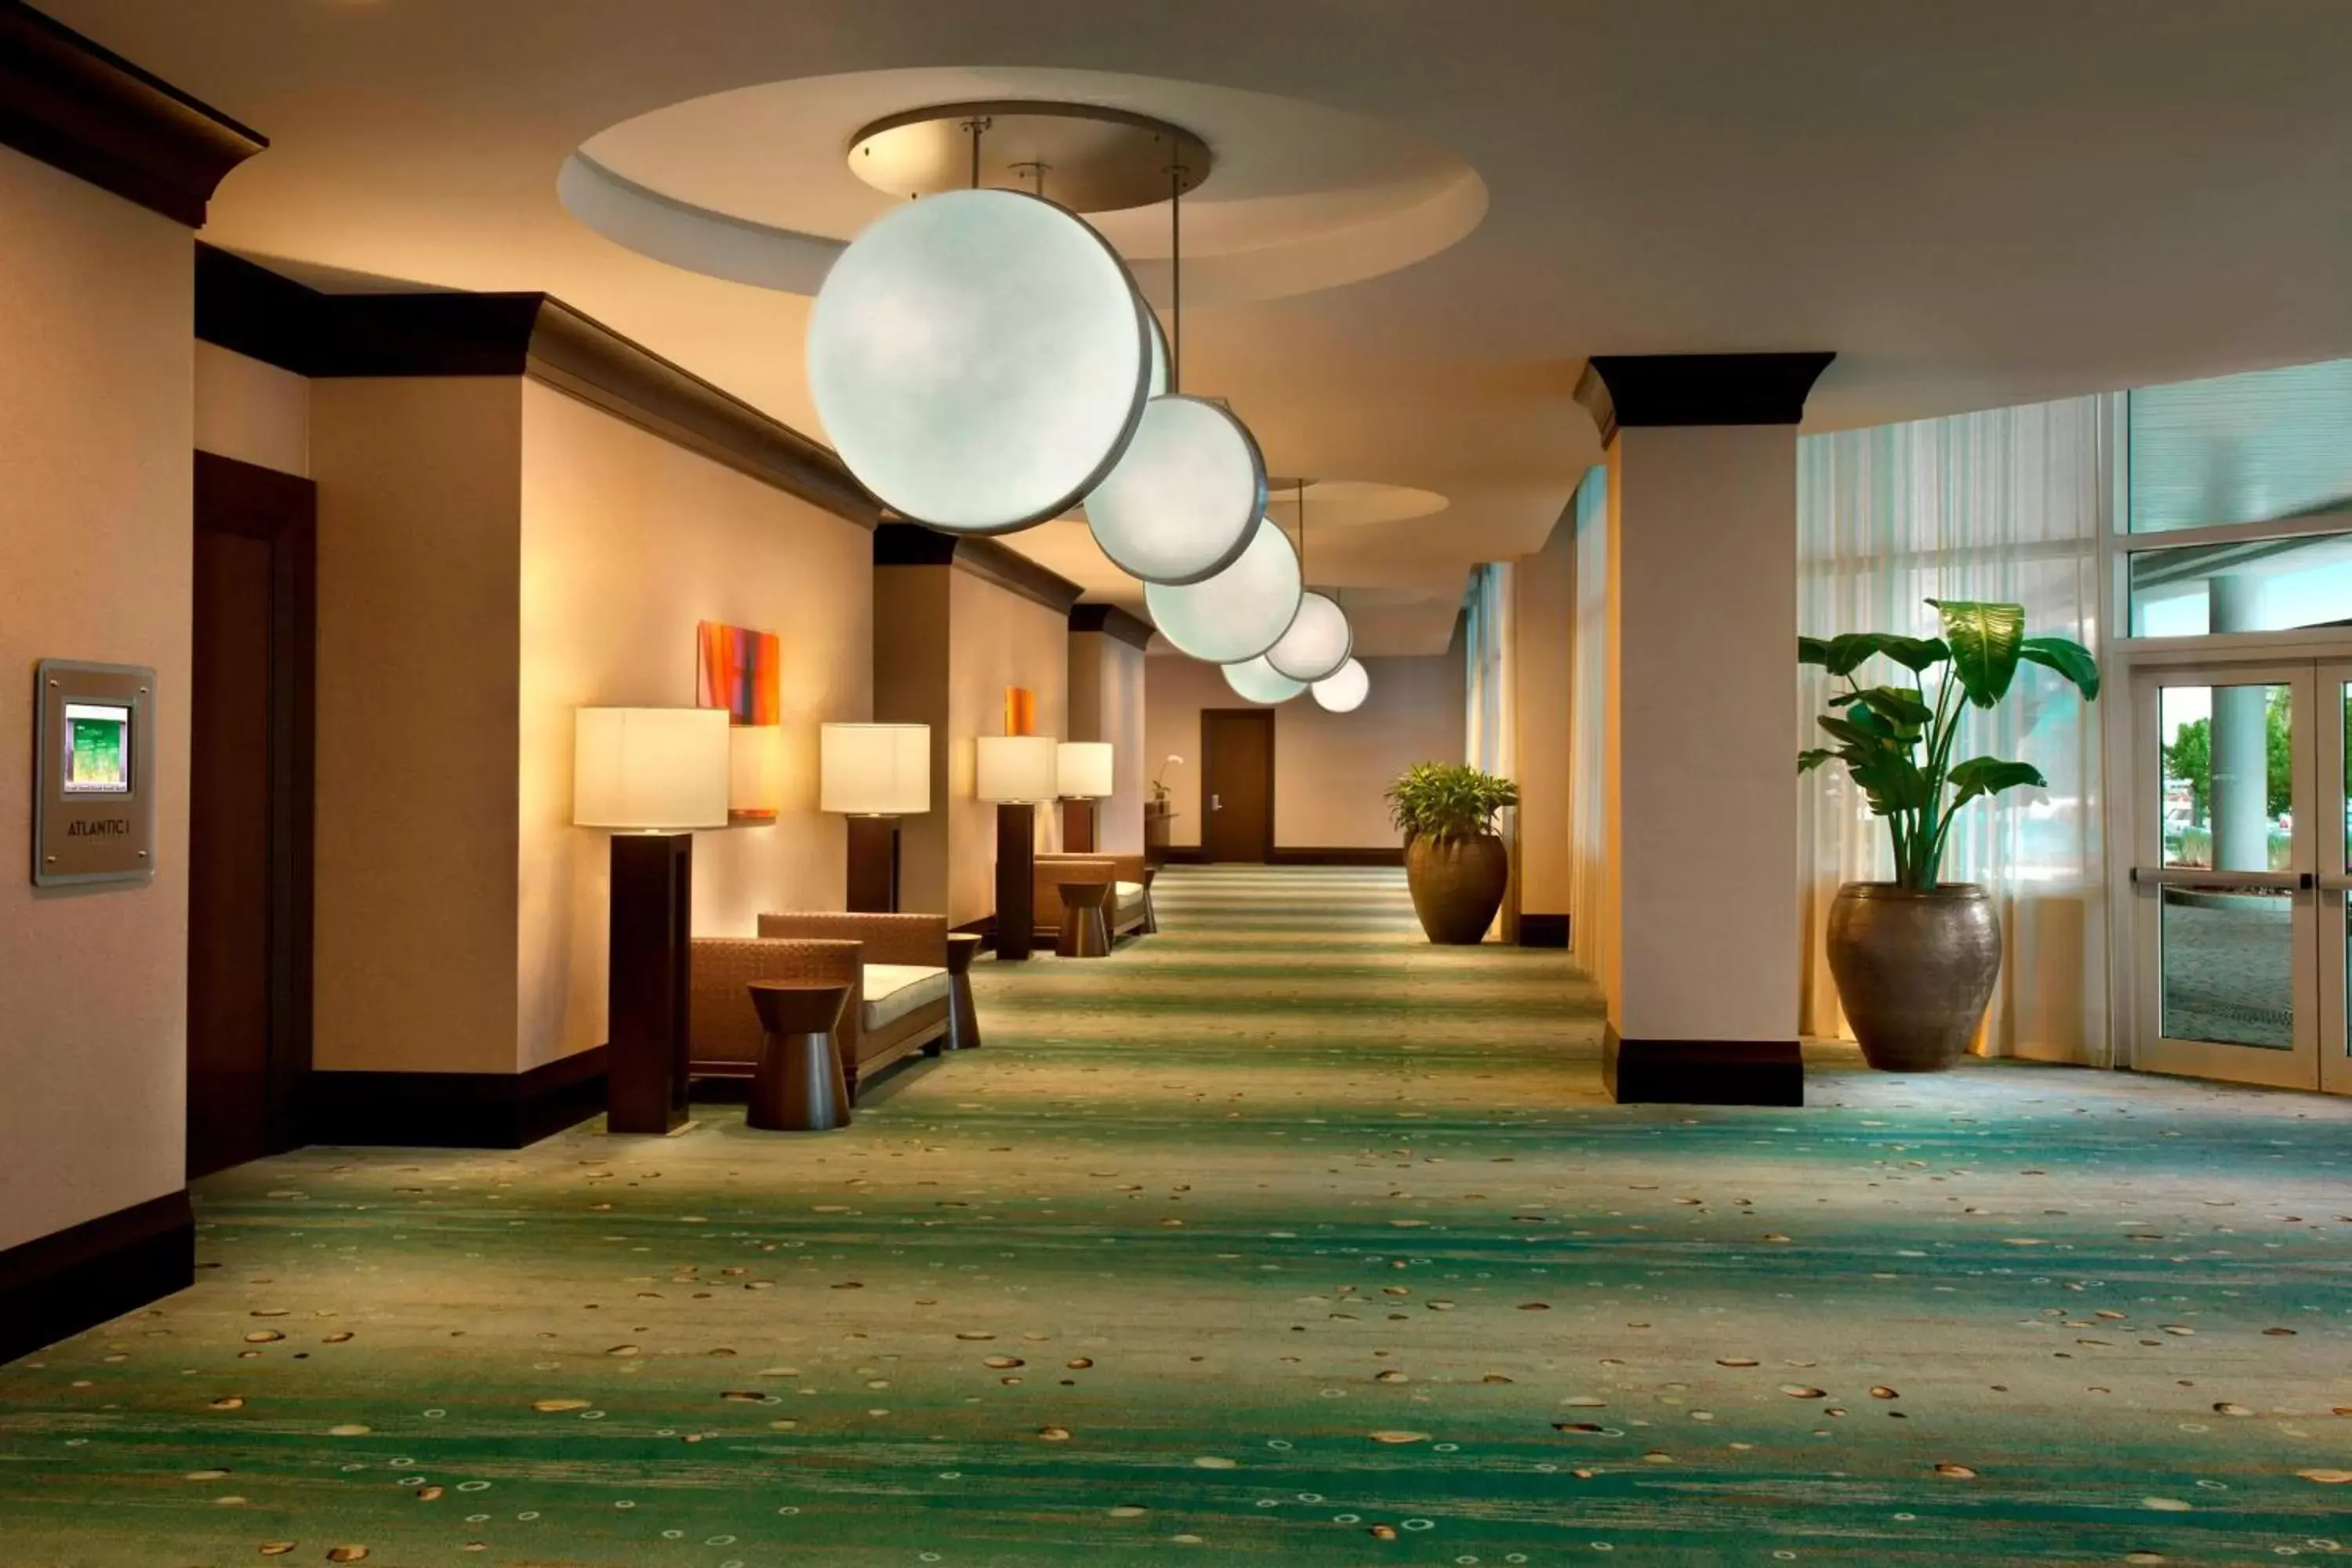 Meeting/conference room in The Westin Fort Lauderdale Beach Resort